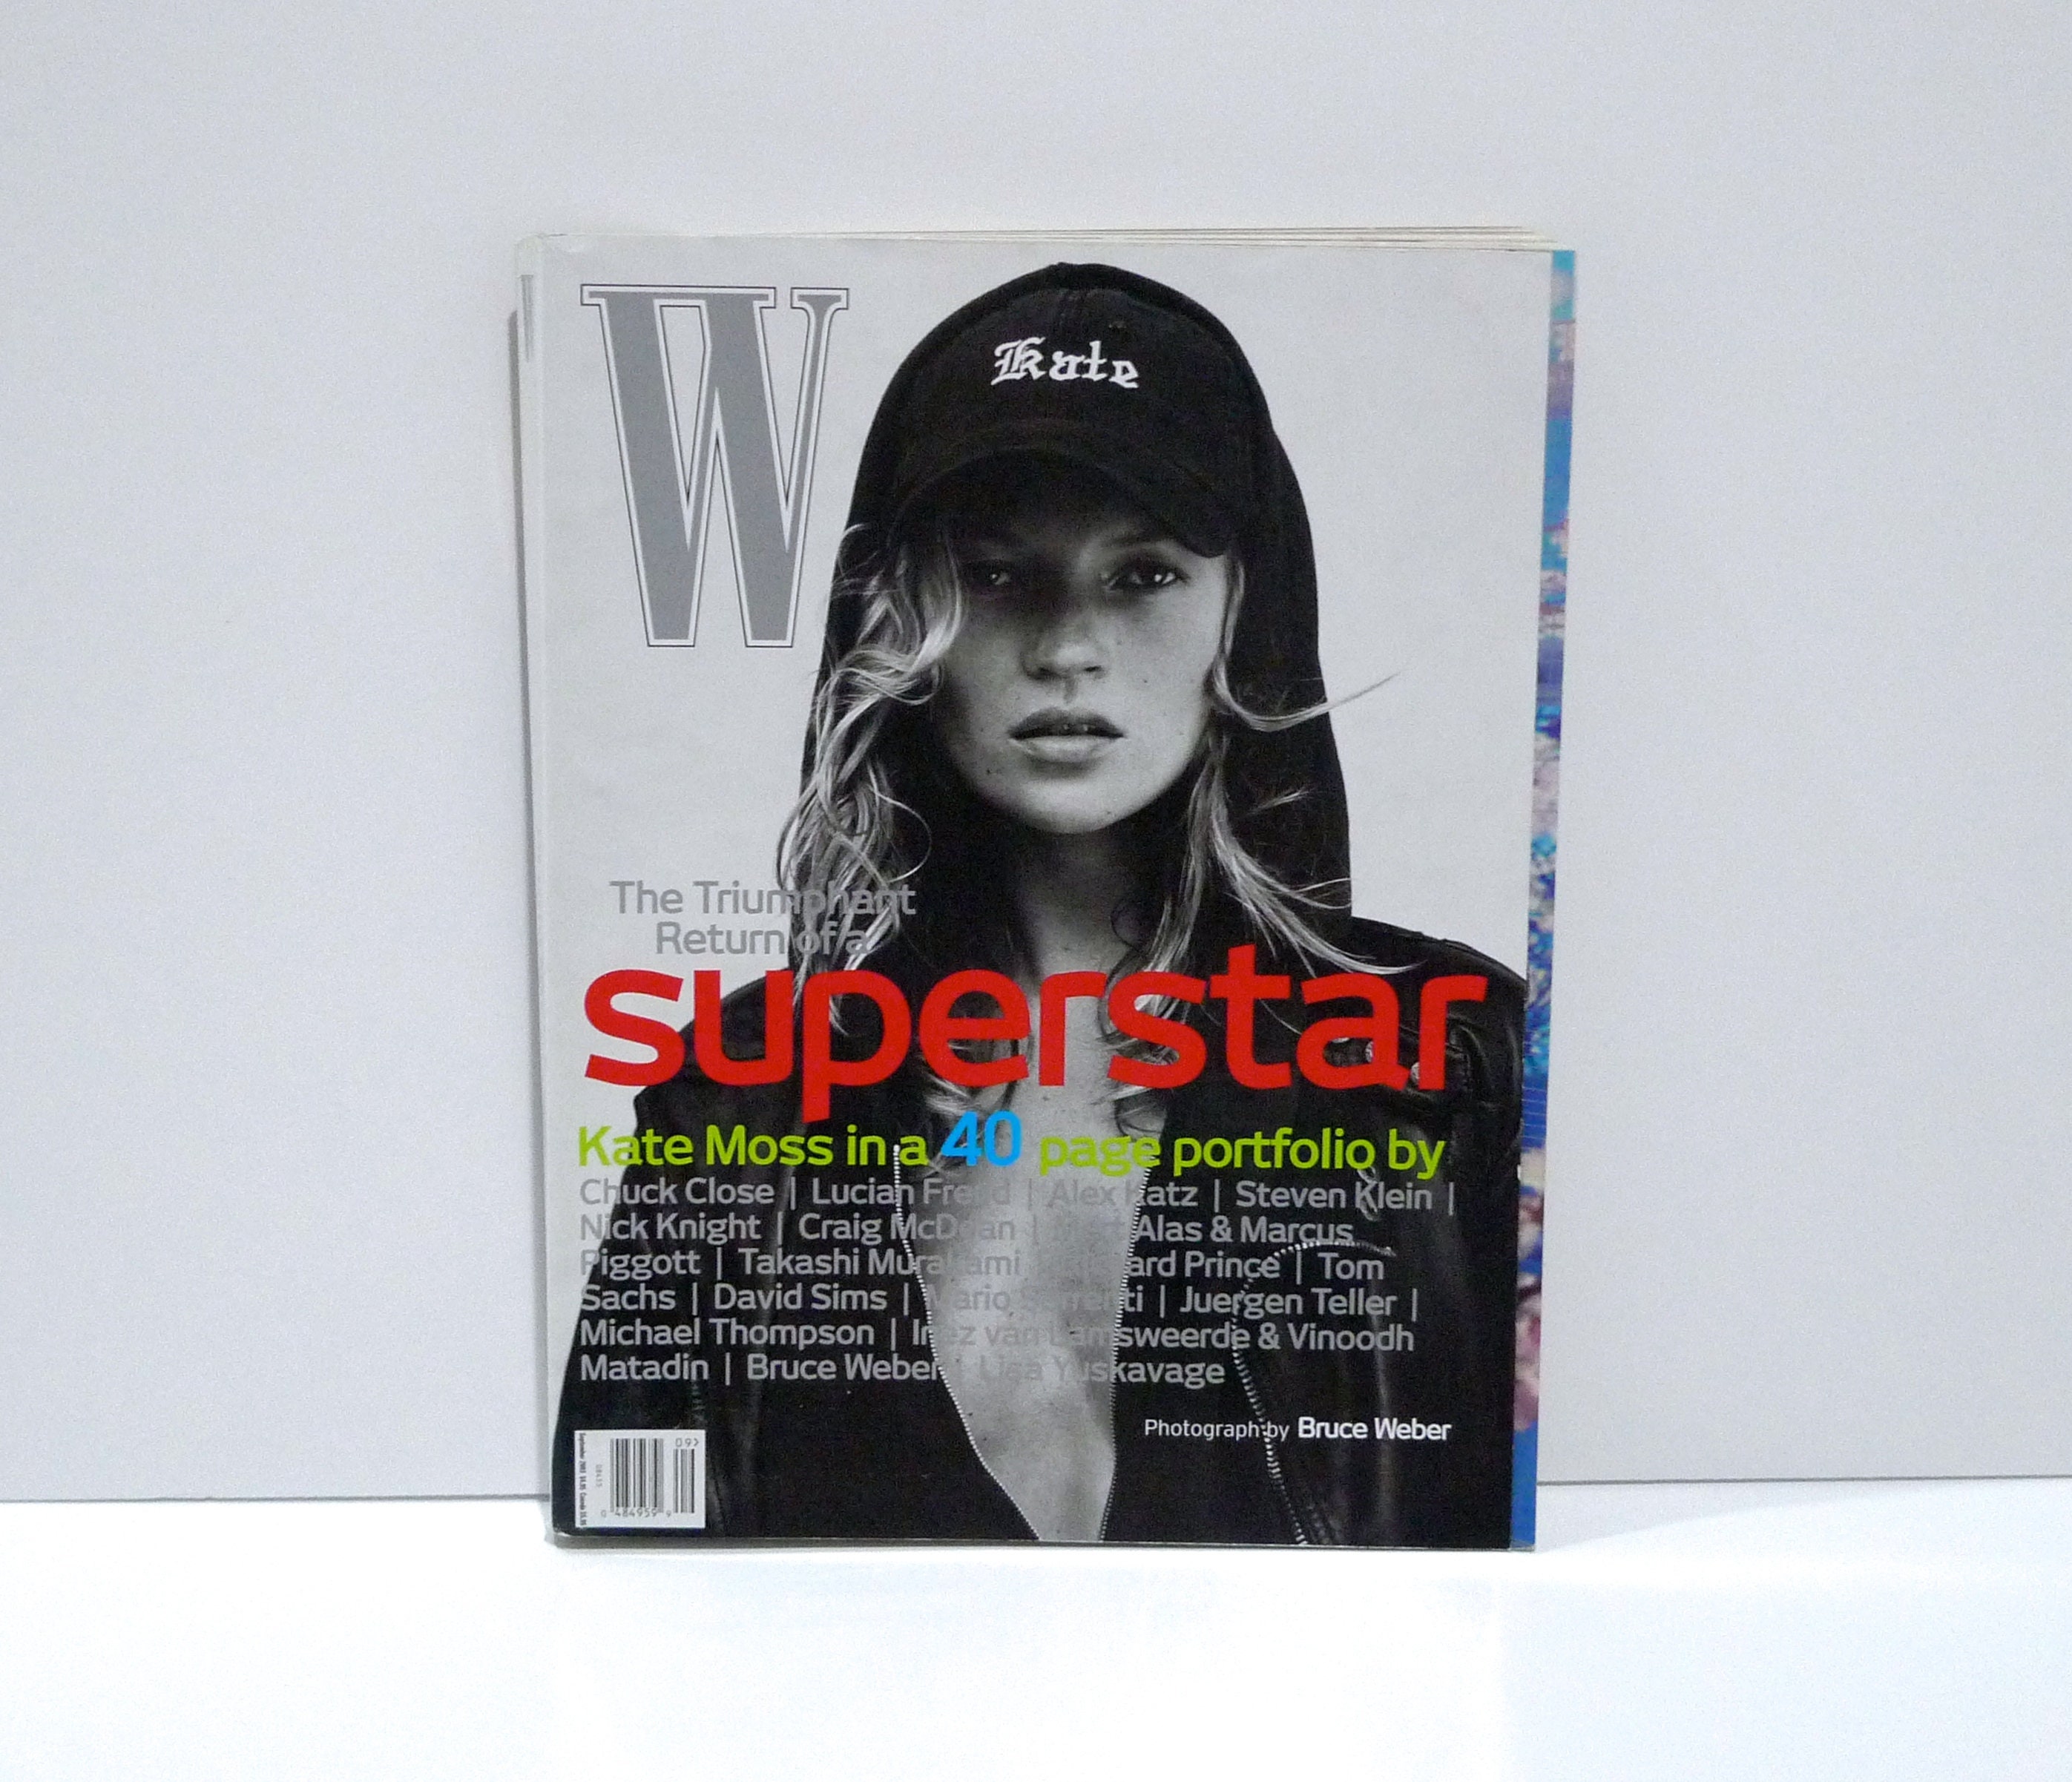 The Stephen Sprouse Book - Kate Moss in Sprouse!